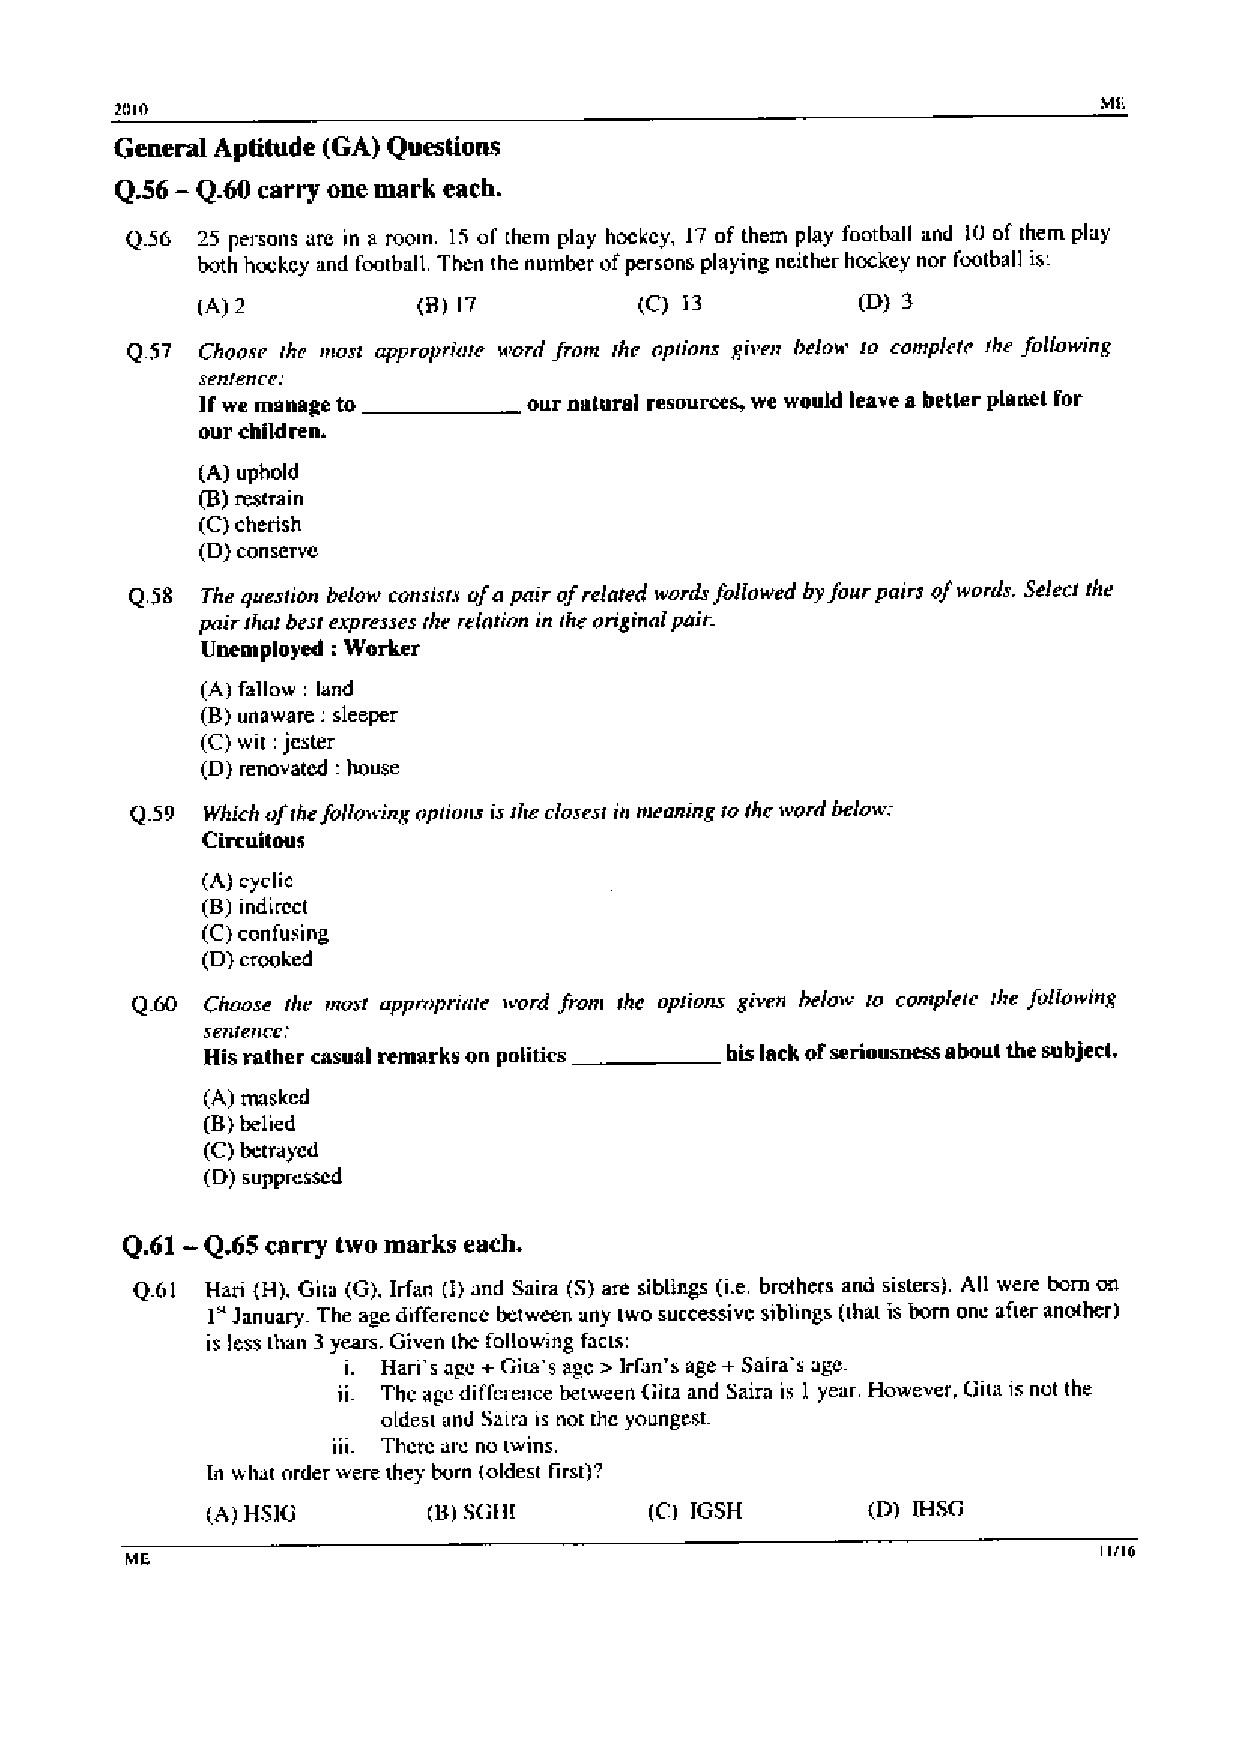 GATE Exam Question Paper 2010 Mechanical Engineering 11